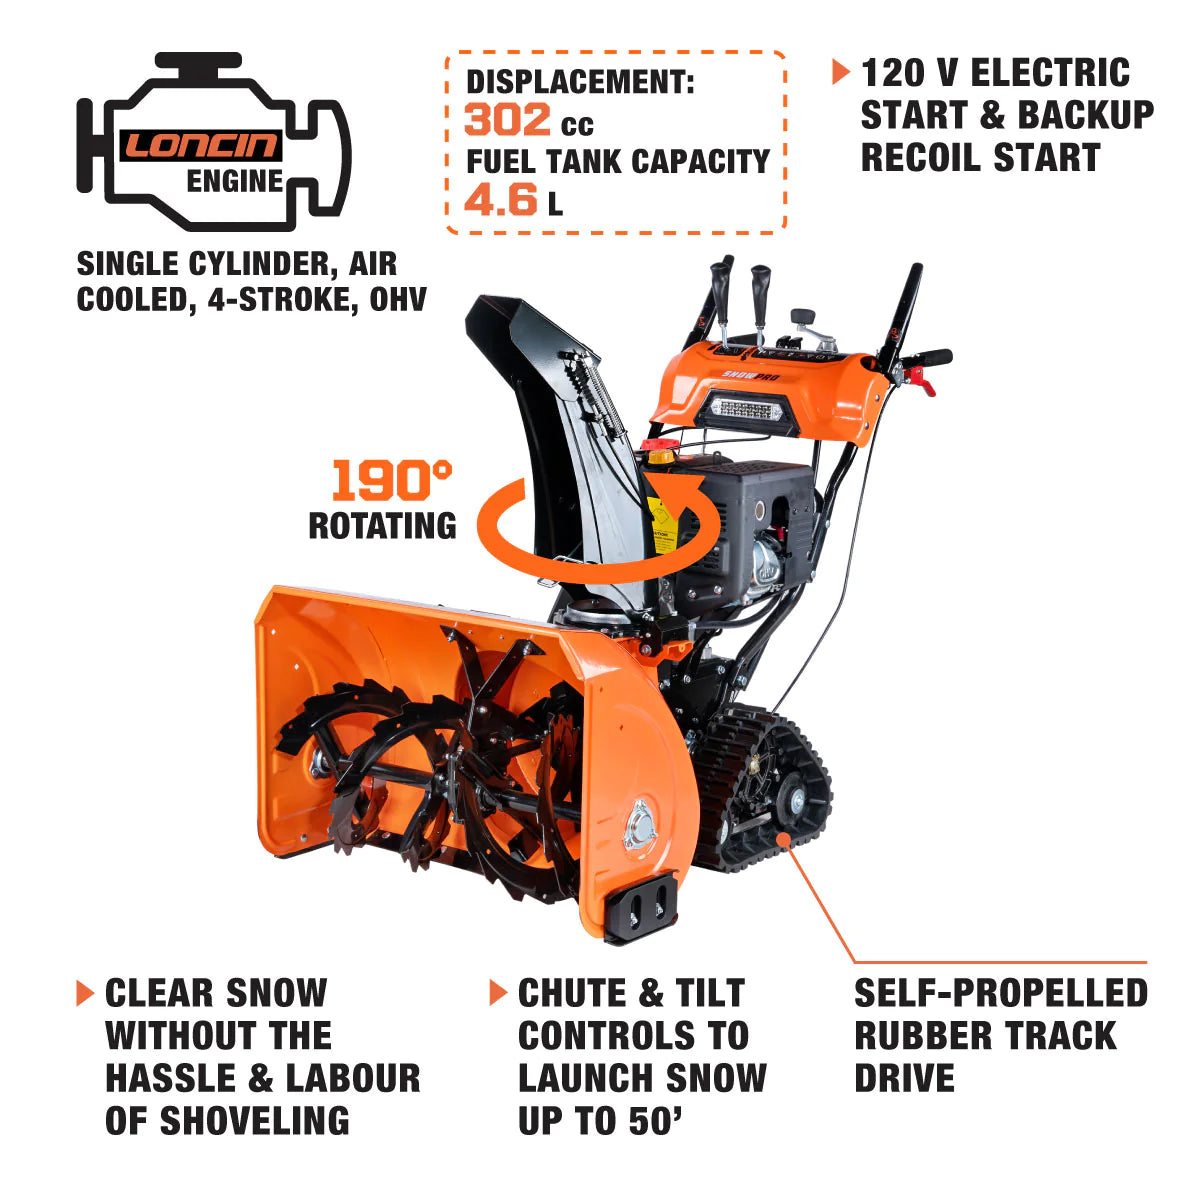 New Premium 30” Self-Propelled Gas-Powered Snow Blower, Dual-Stage, Rubber Track, Heated Hand Grips, Electric Start